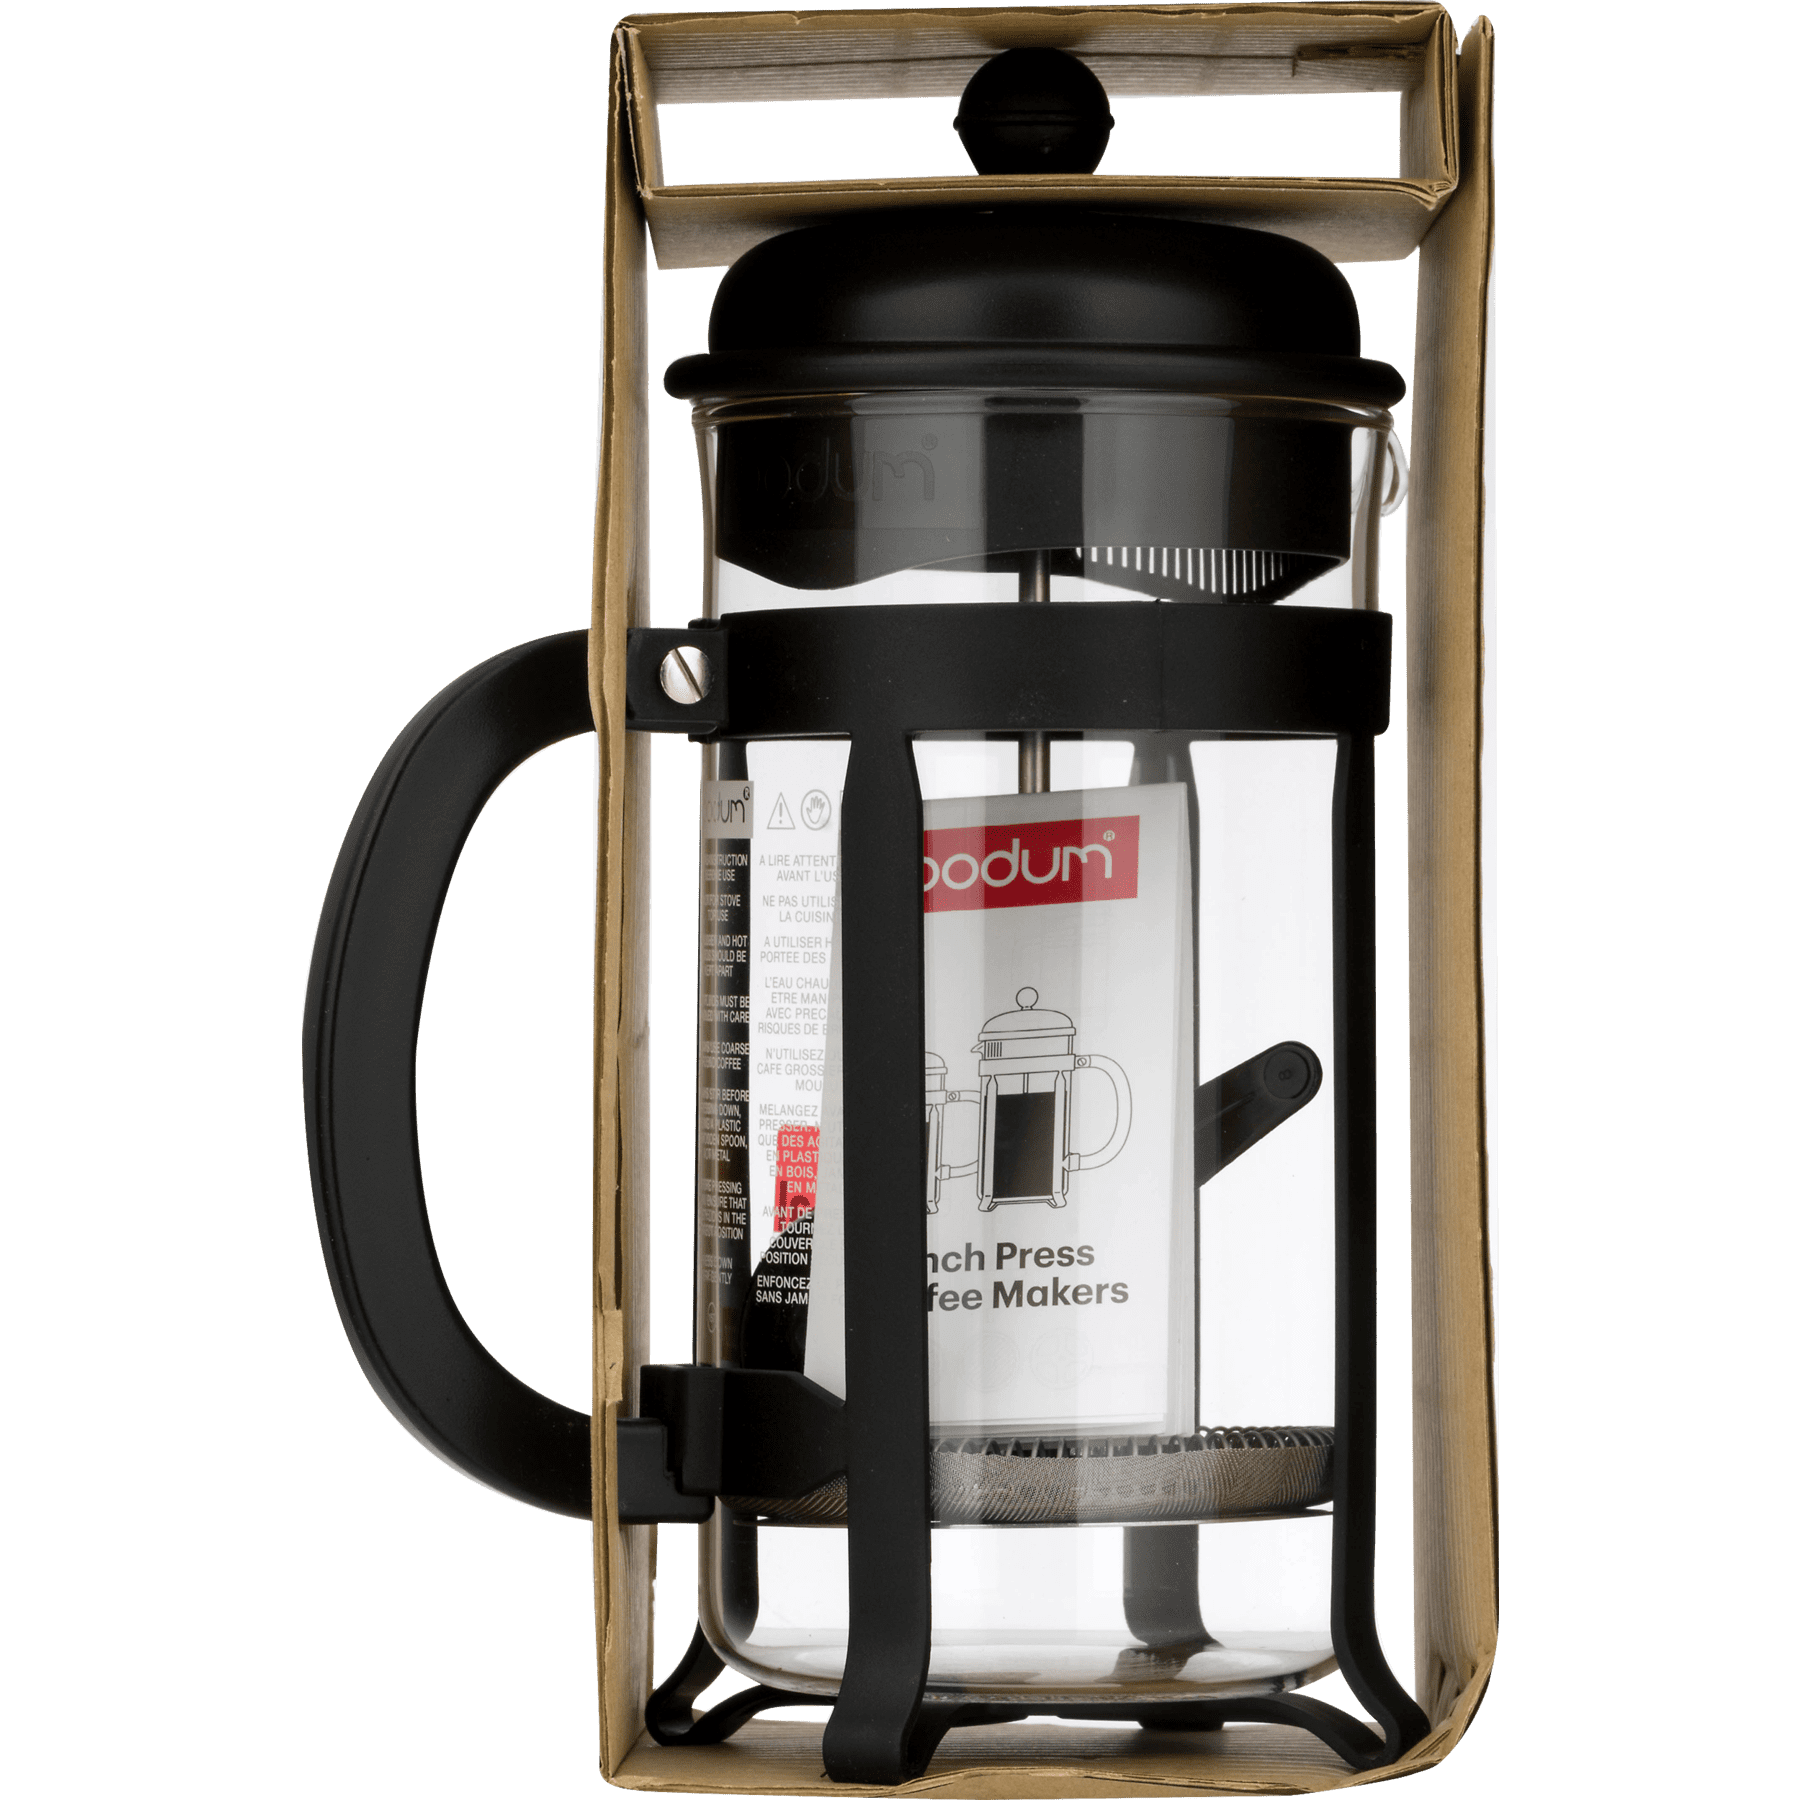 EILEEN - French Press Coffee maker, 8 cup, 1.0 l, 34 oz (Copper) – The  Lifestyle Dictionary